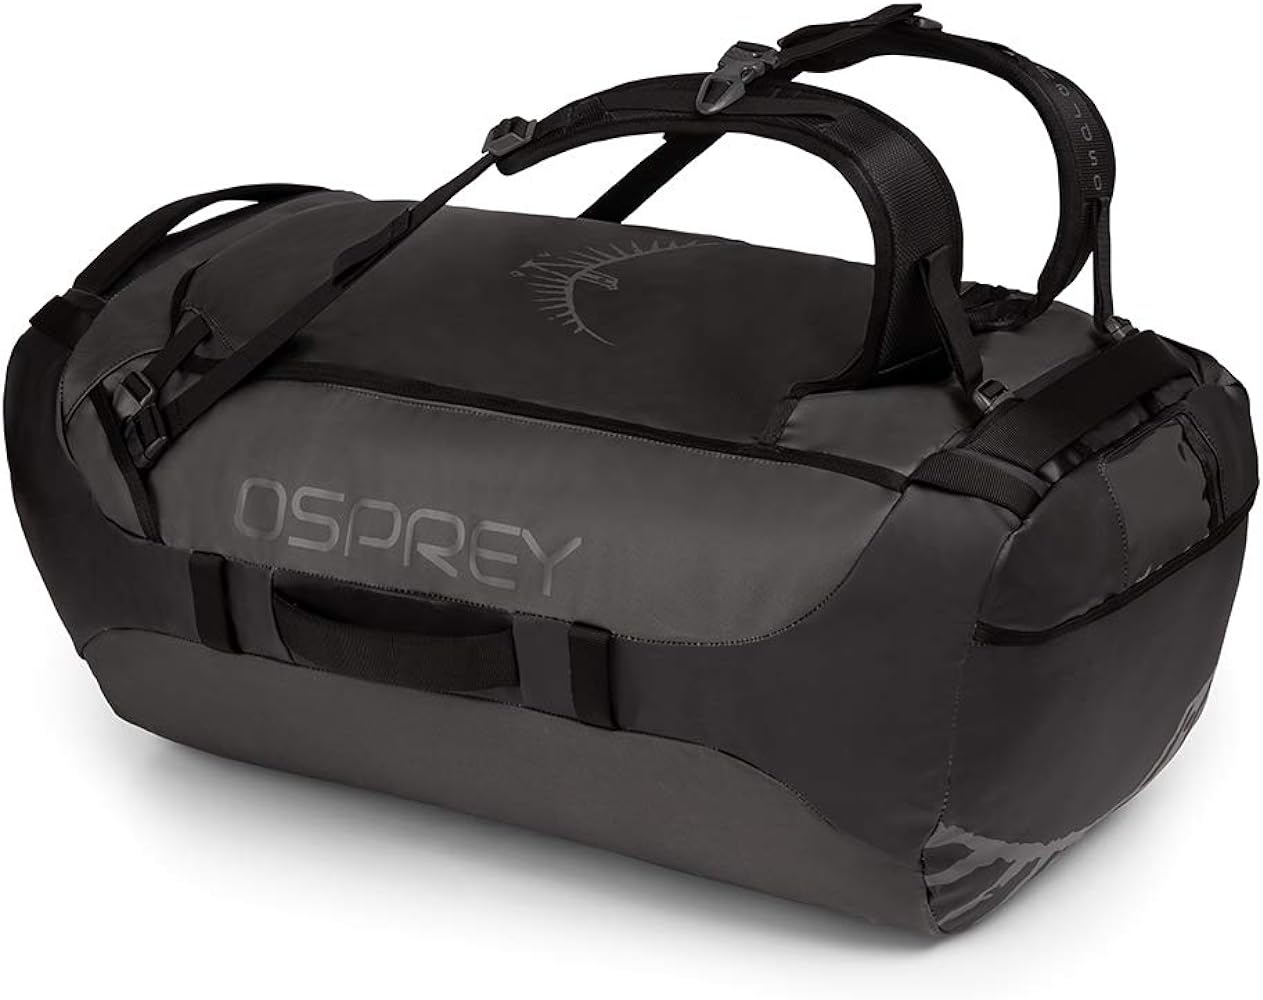 Osprey Transporter 95 Review  Is This The Duffel Of Your Dreams?